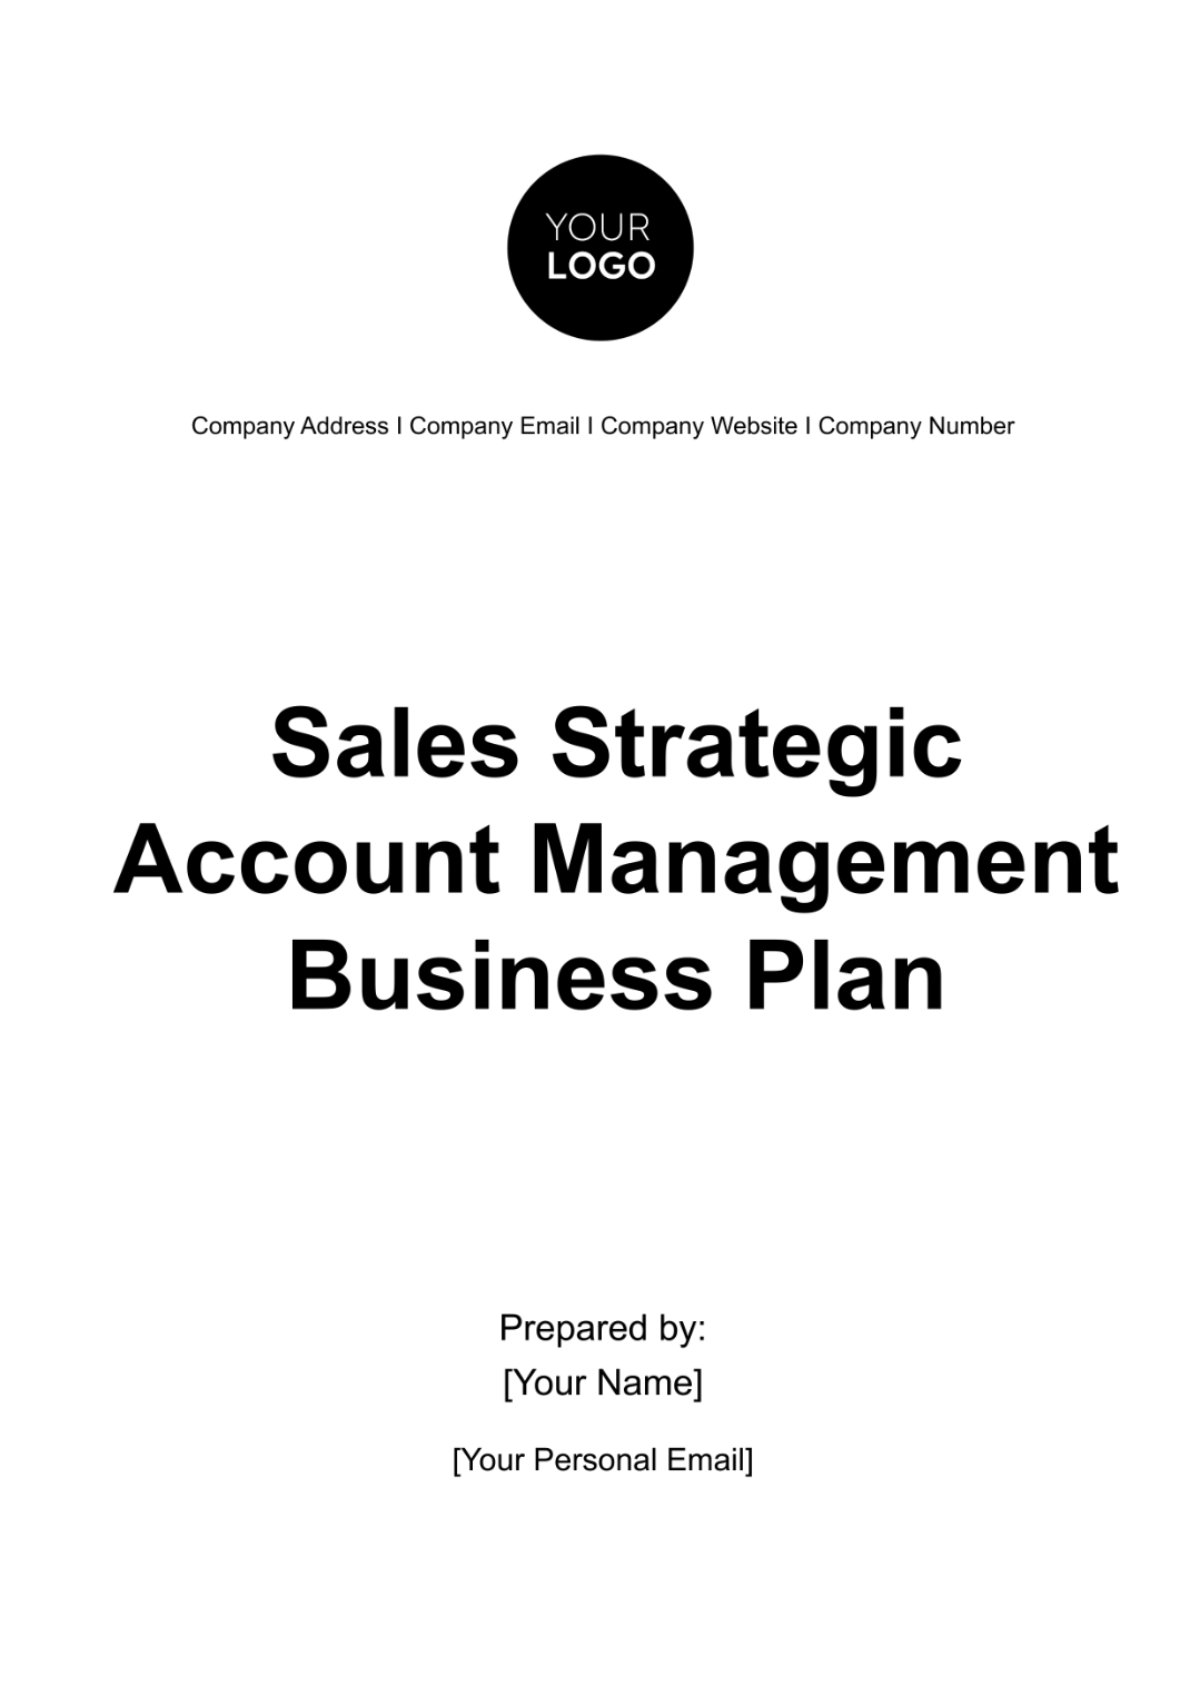 Free Sales Strategic Account Management Business Plan Template